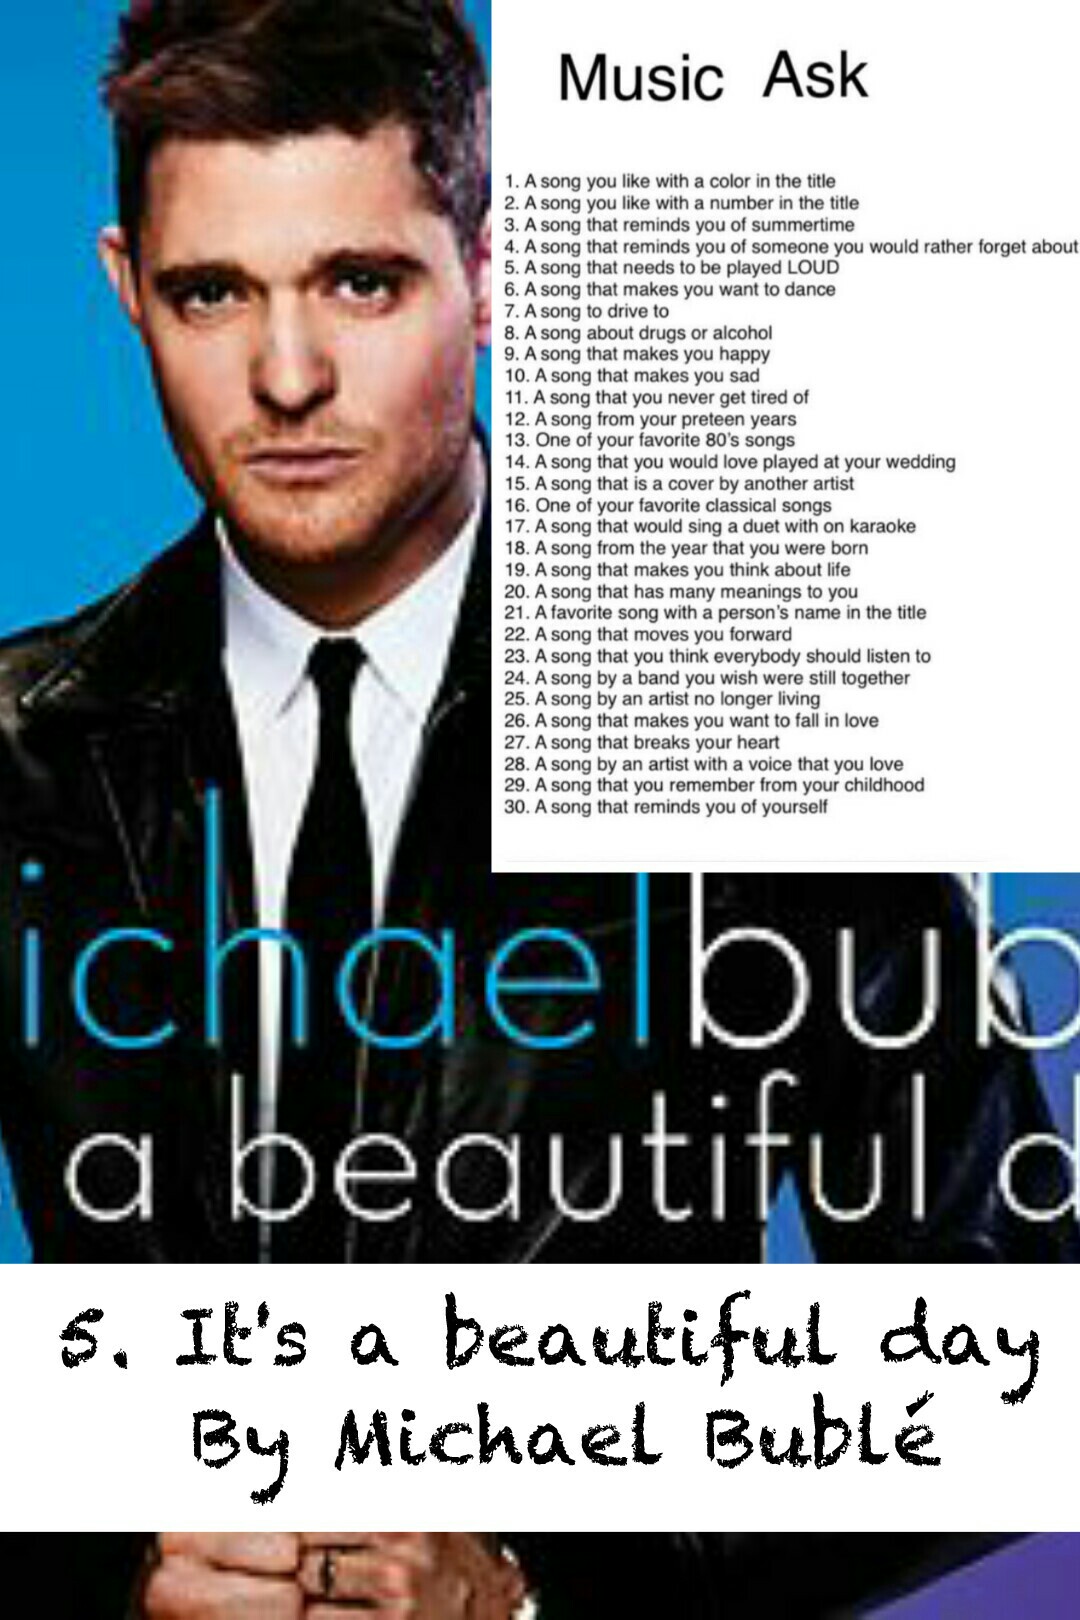 5. It's a beautiful day 
By Michael Bublé